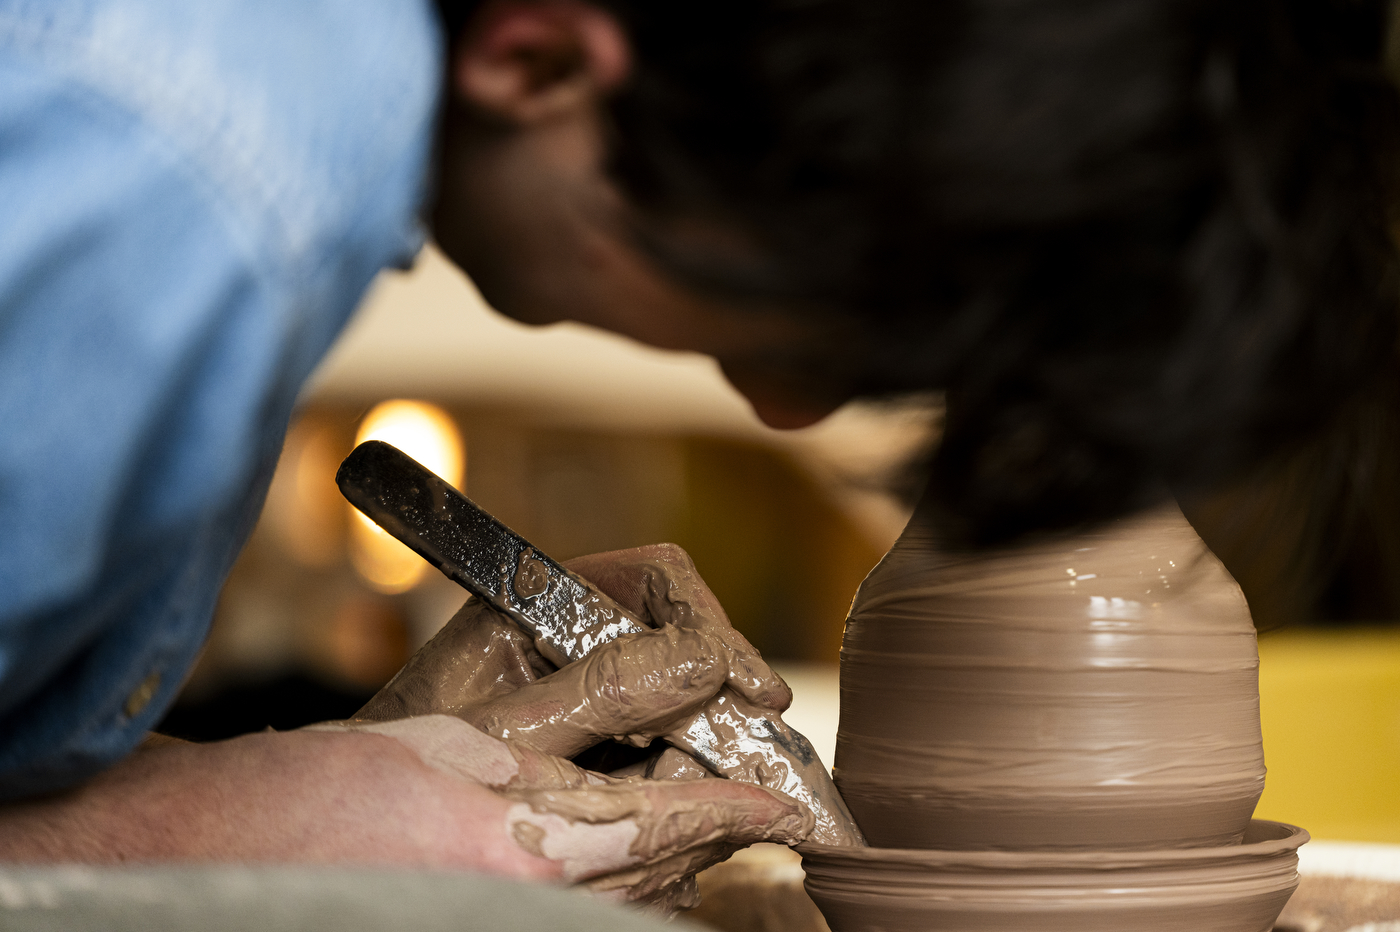 David Chatson shaping clay with a knife, creating a ridge.